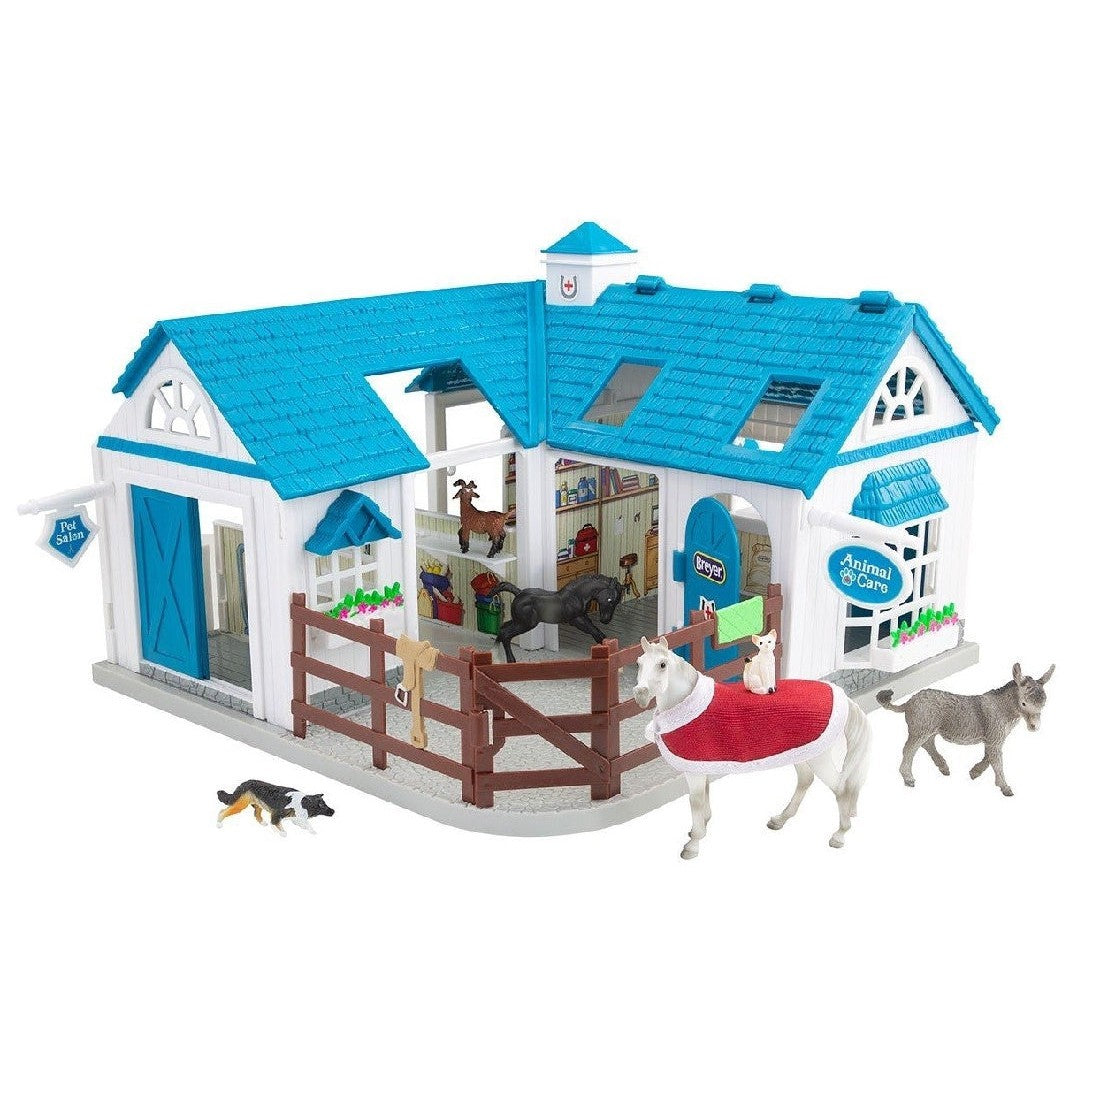 Breyer Horse Toys stable playset with animals and accessories.